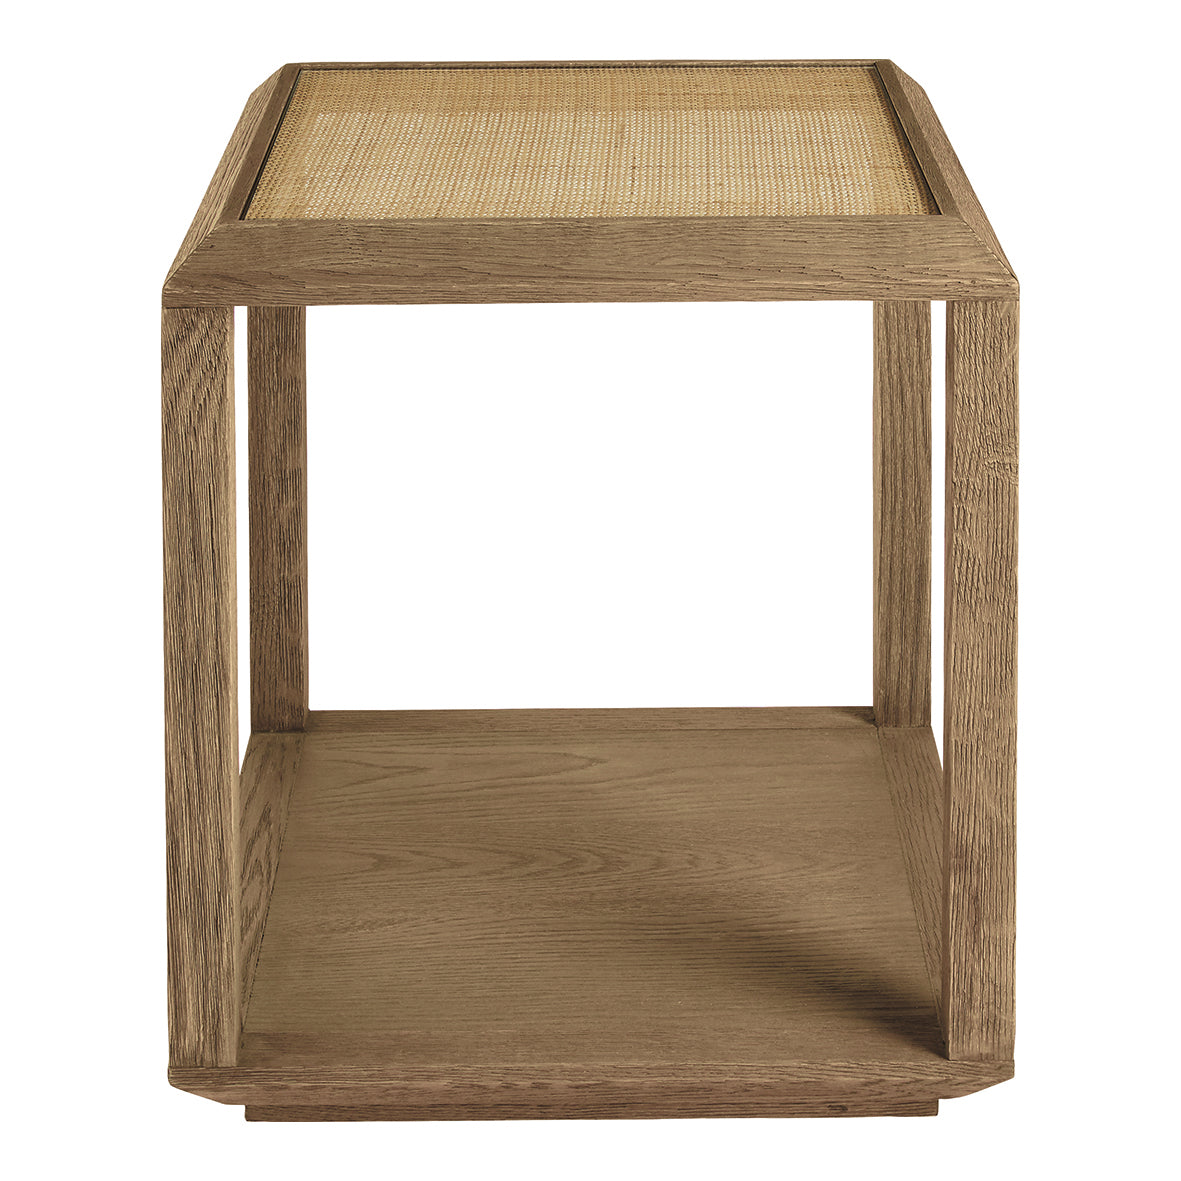 Ema side table